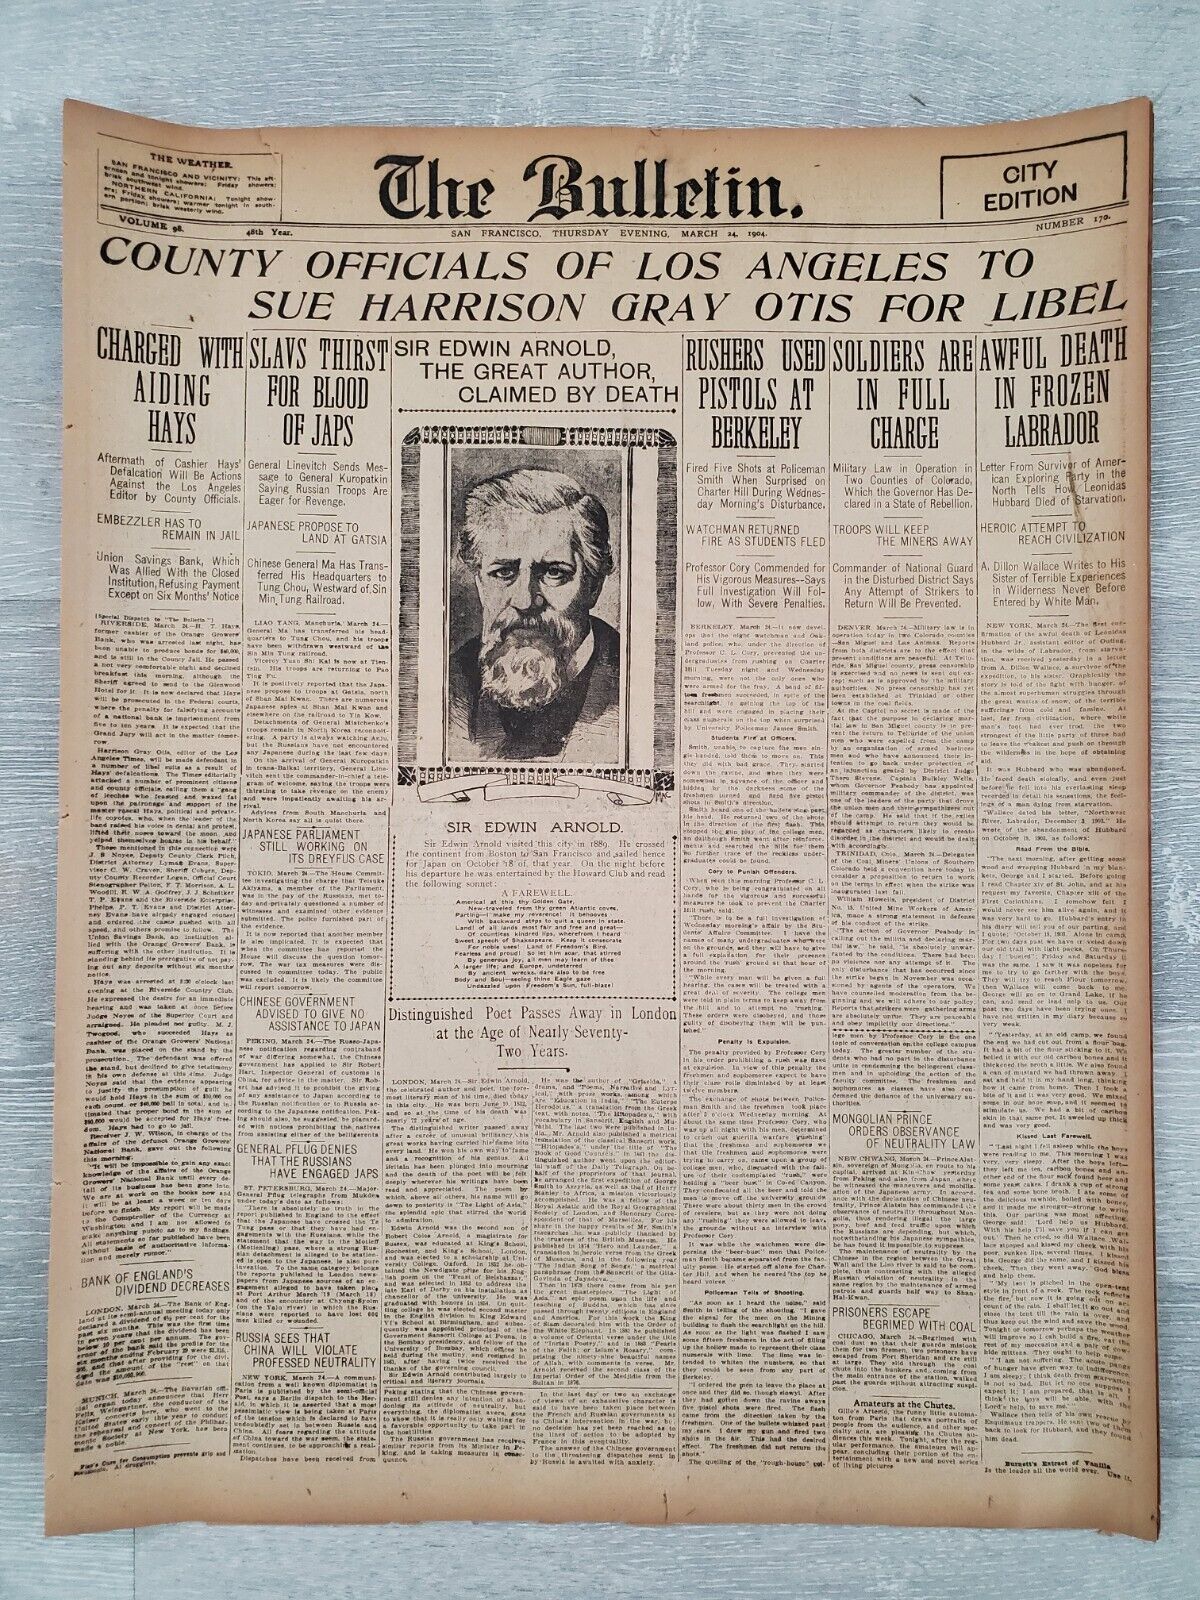 Vintage March 24 1904 The Bulletin San Francisco- Coverage of Russo-Japanese War